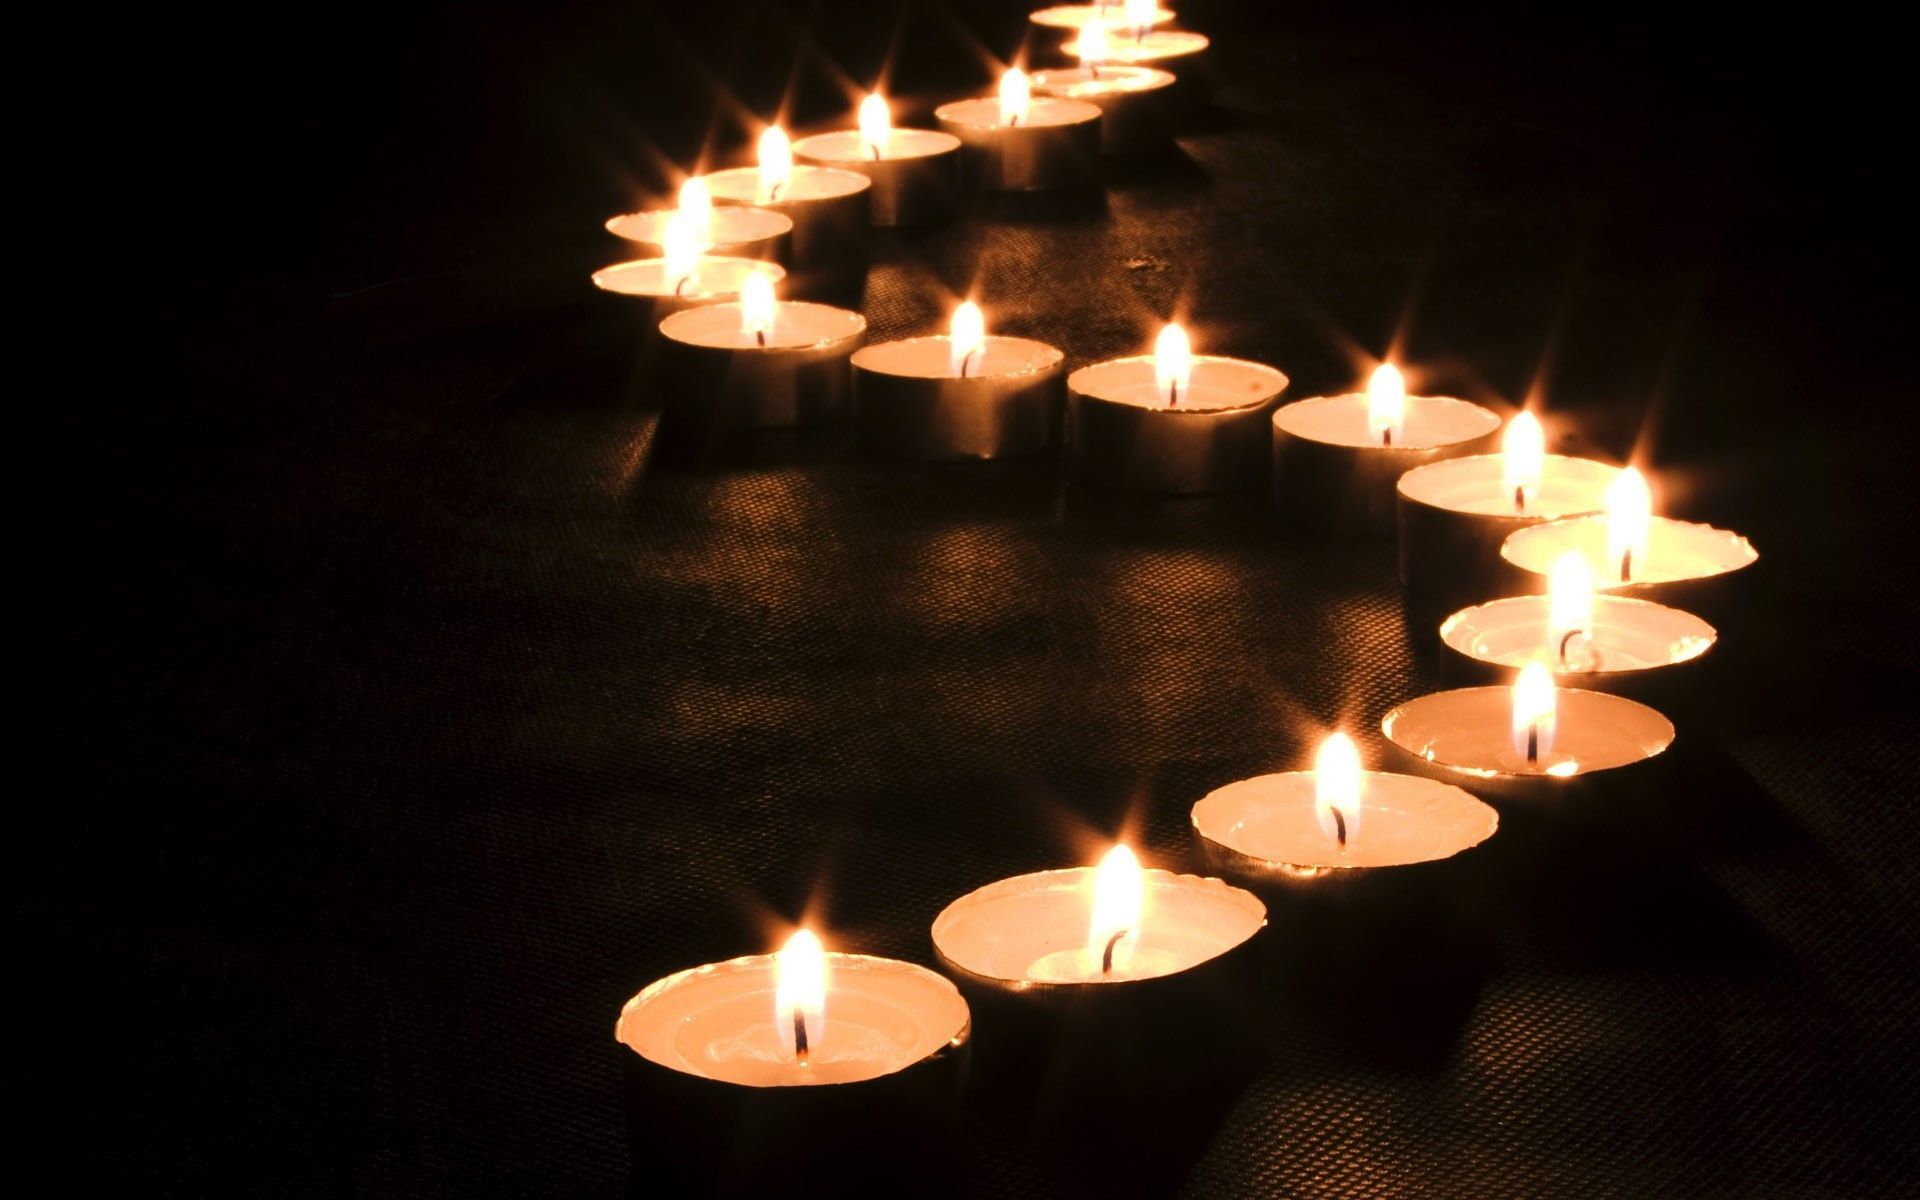 lit-candles-on-the-floor-photography-hd-wallpaper-1920x1200-7816